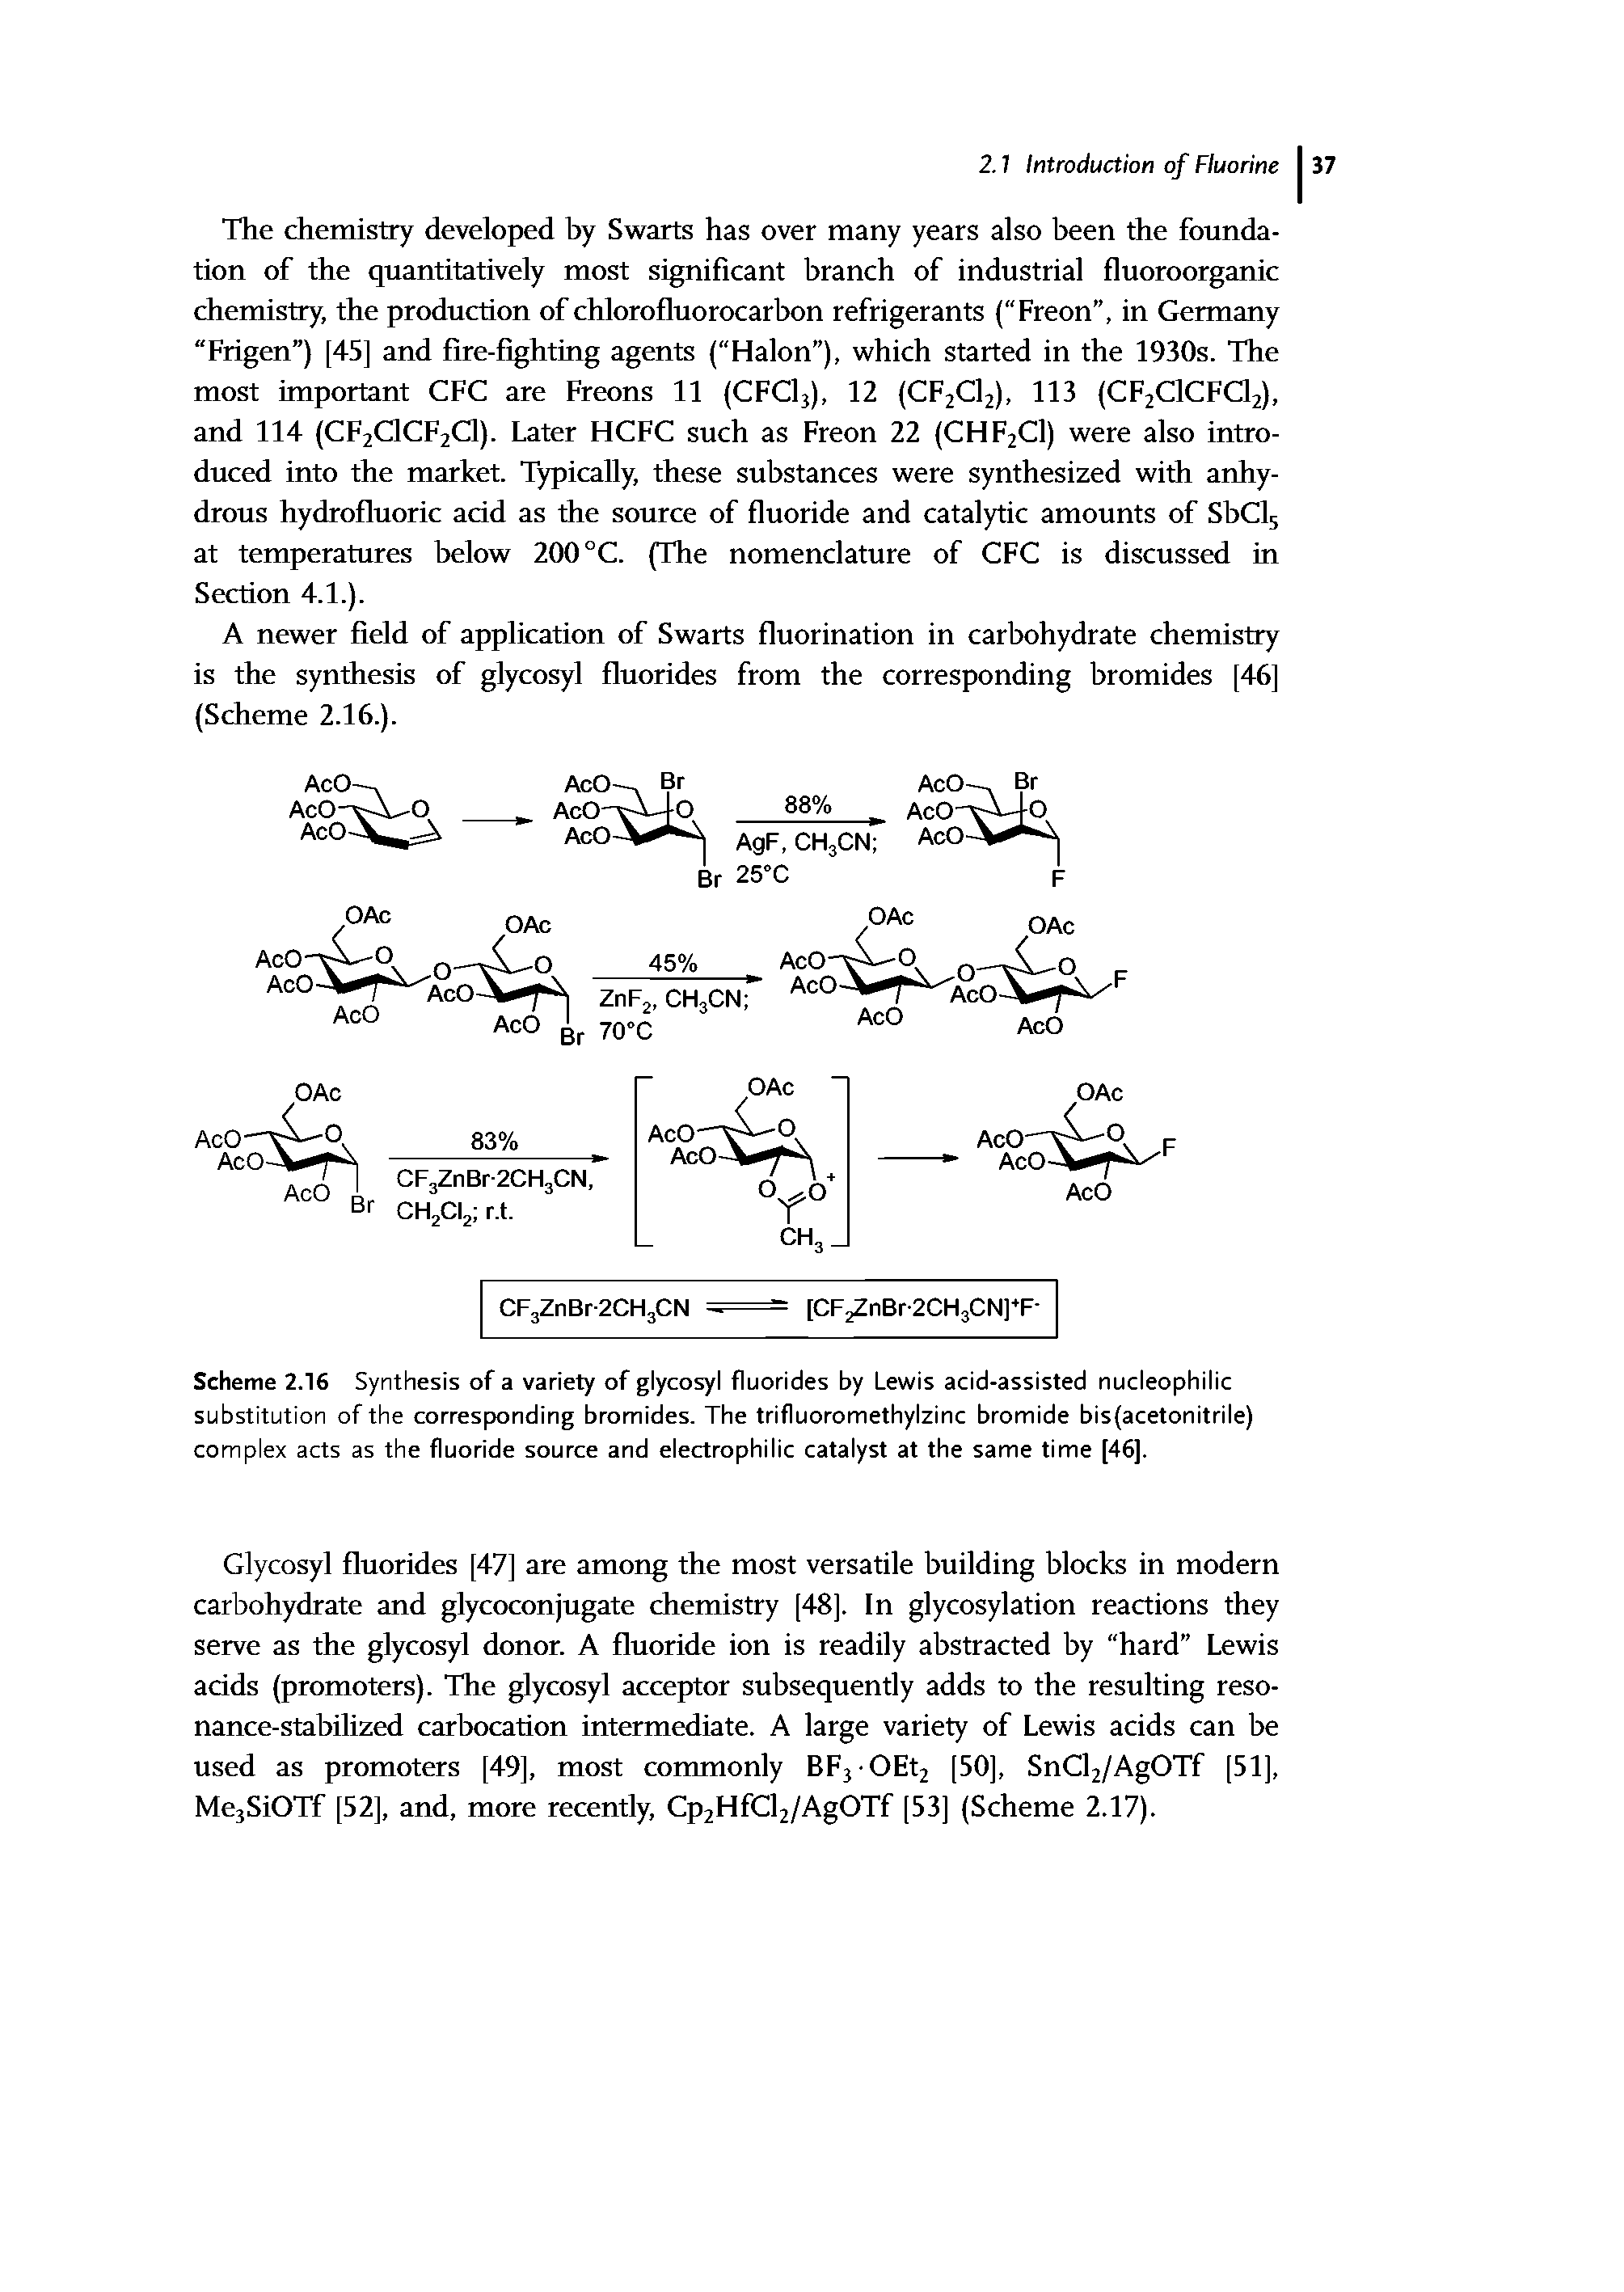 Scheme 2.16 Synthesis of a variety of glycosyl fluorides by Lewis acid-assisted nucleophilic substitution of the corresponding bromides. The trifluoromethylzinc bromide bis(acetonitrile) complex acts as the fluoride source and electrophilic catalyst at the same time [46].